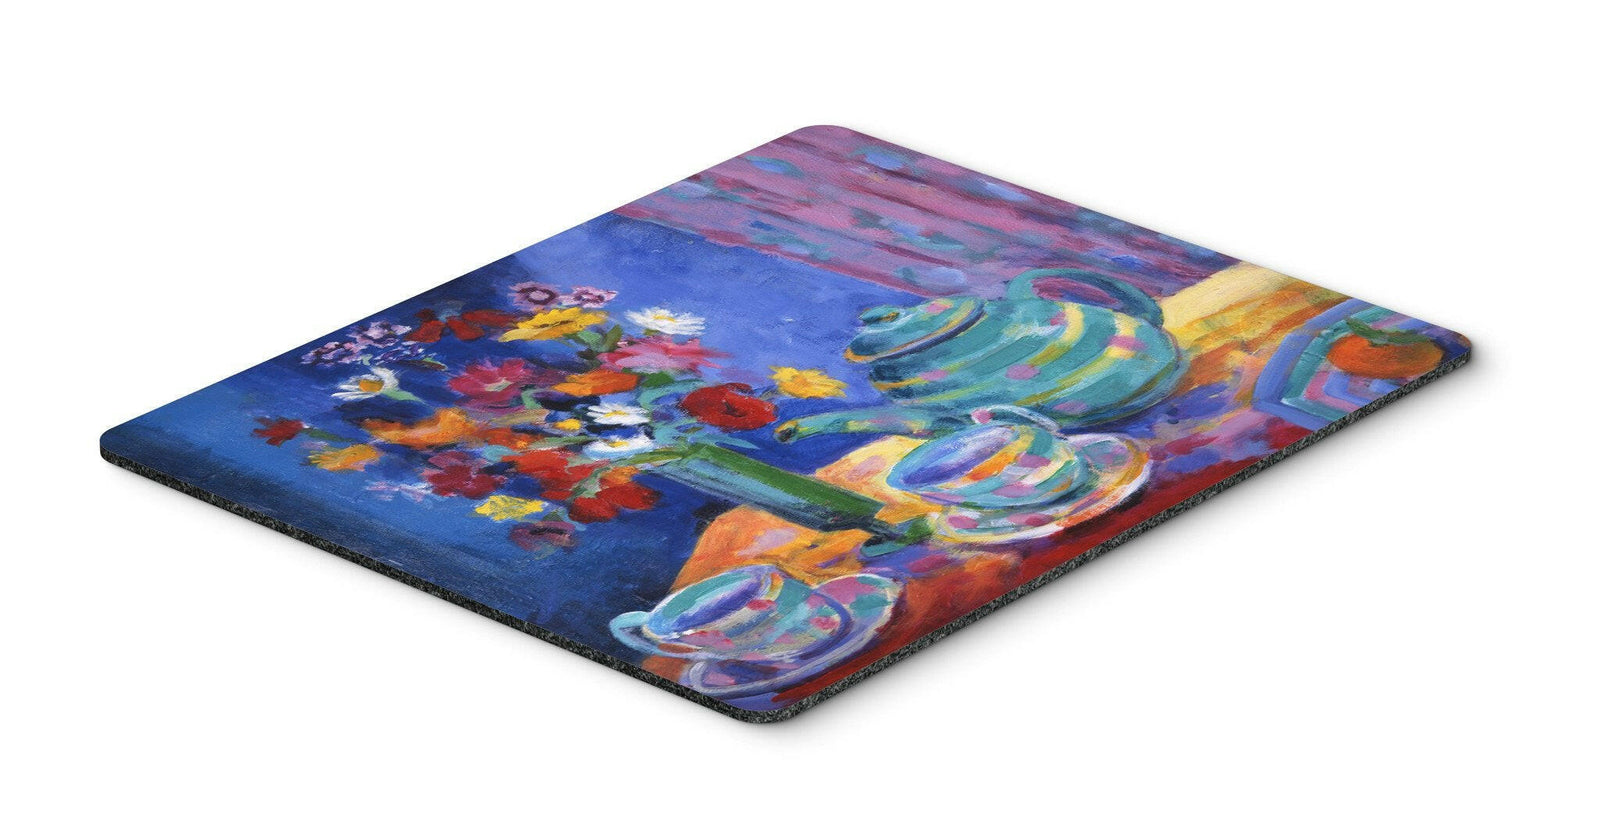 Blue Tea by Wendy Hoile Mouse Pad, Hot Pad or Trivet HWH0010MP by Caroline's Treasures